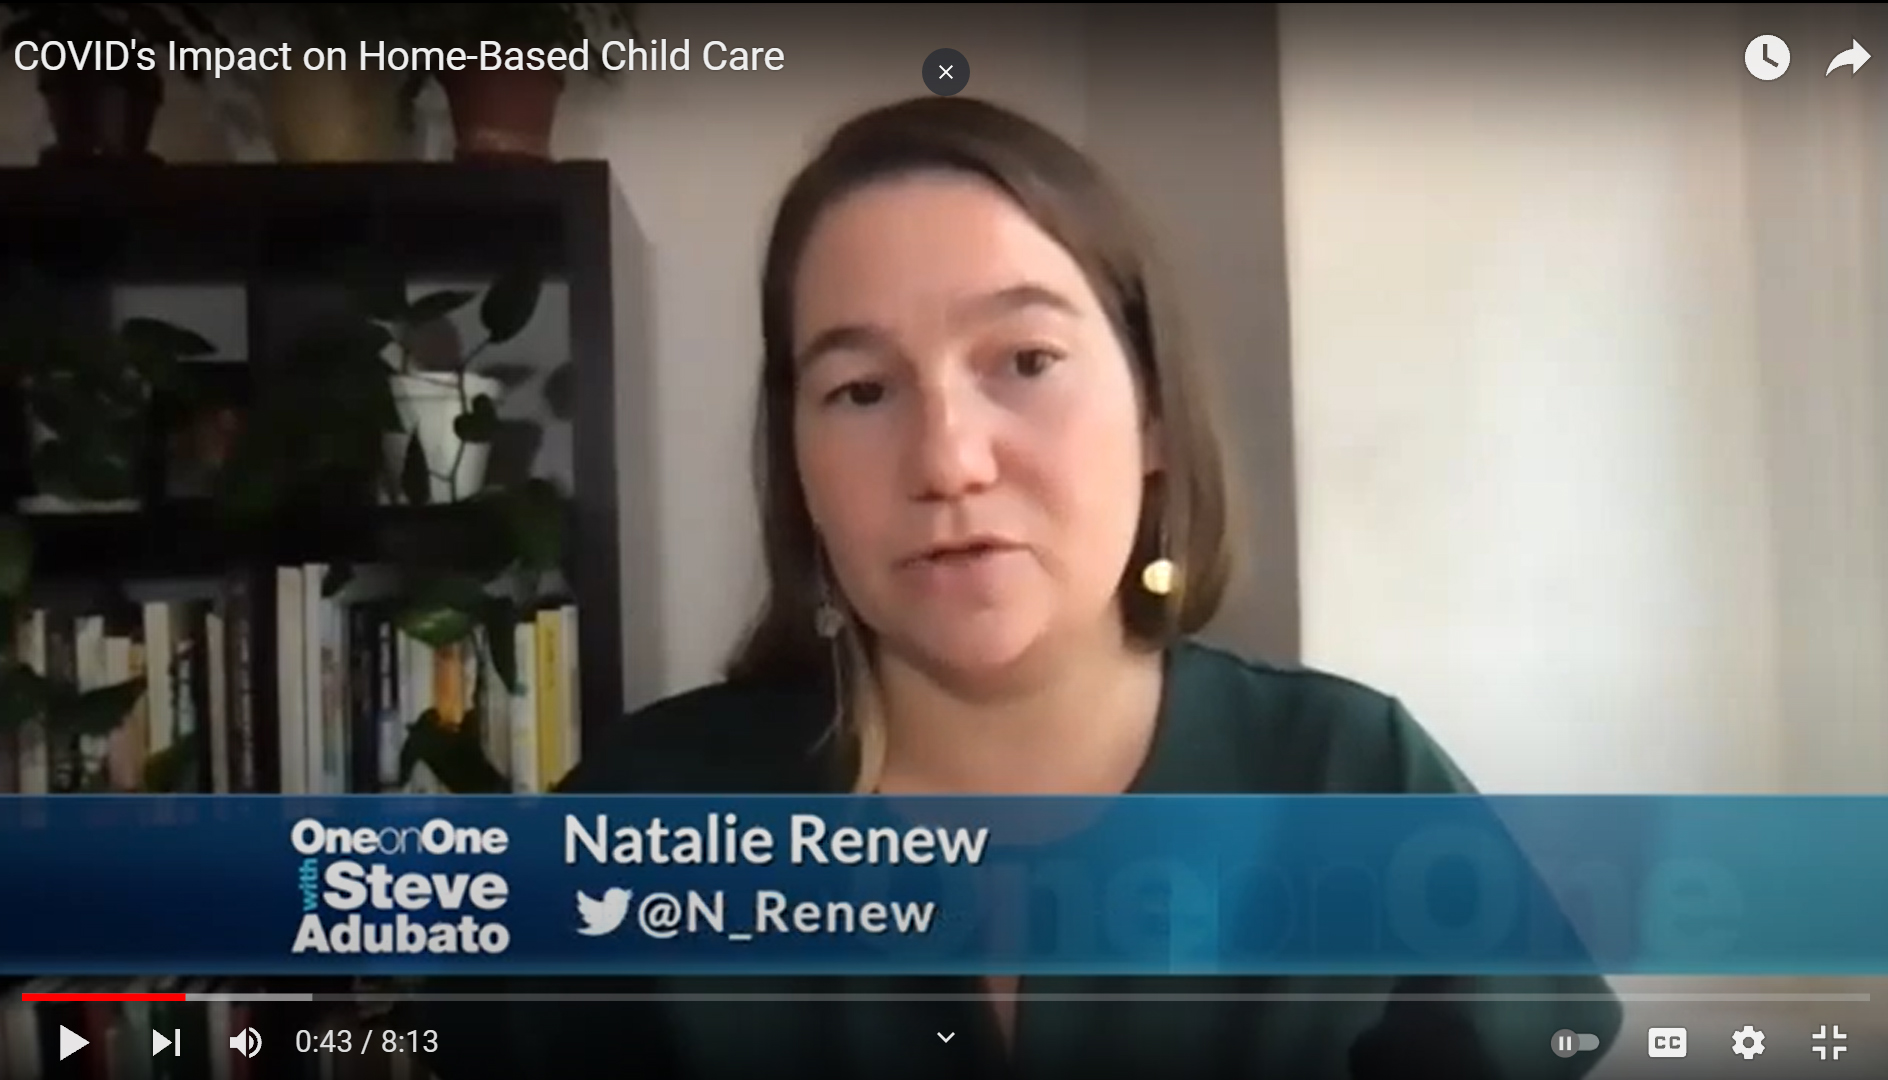 COVID’s Impact on Home-Based Child Care